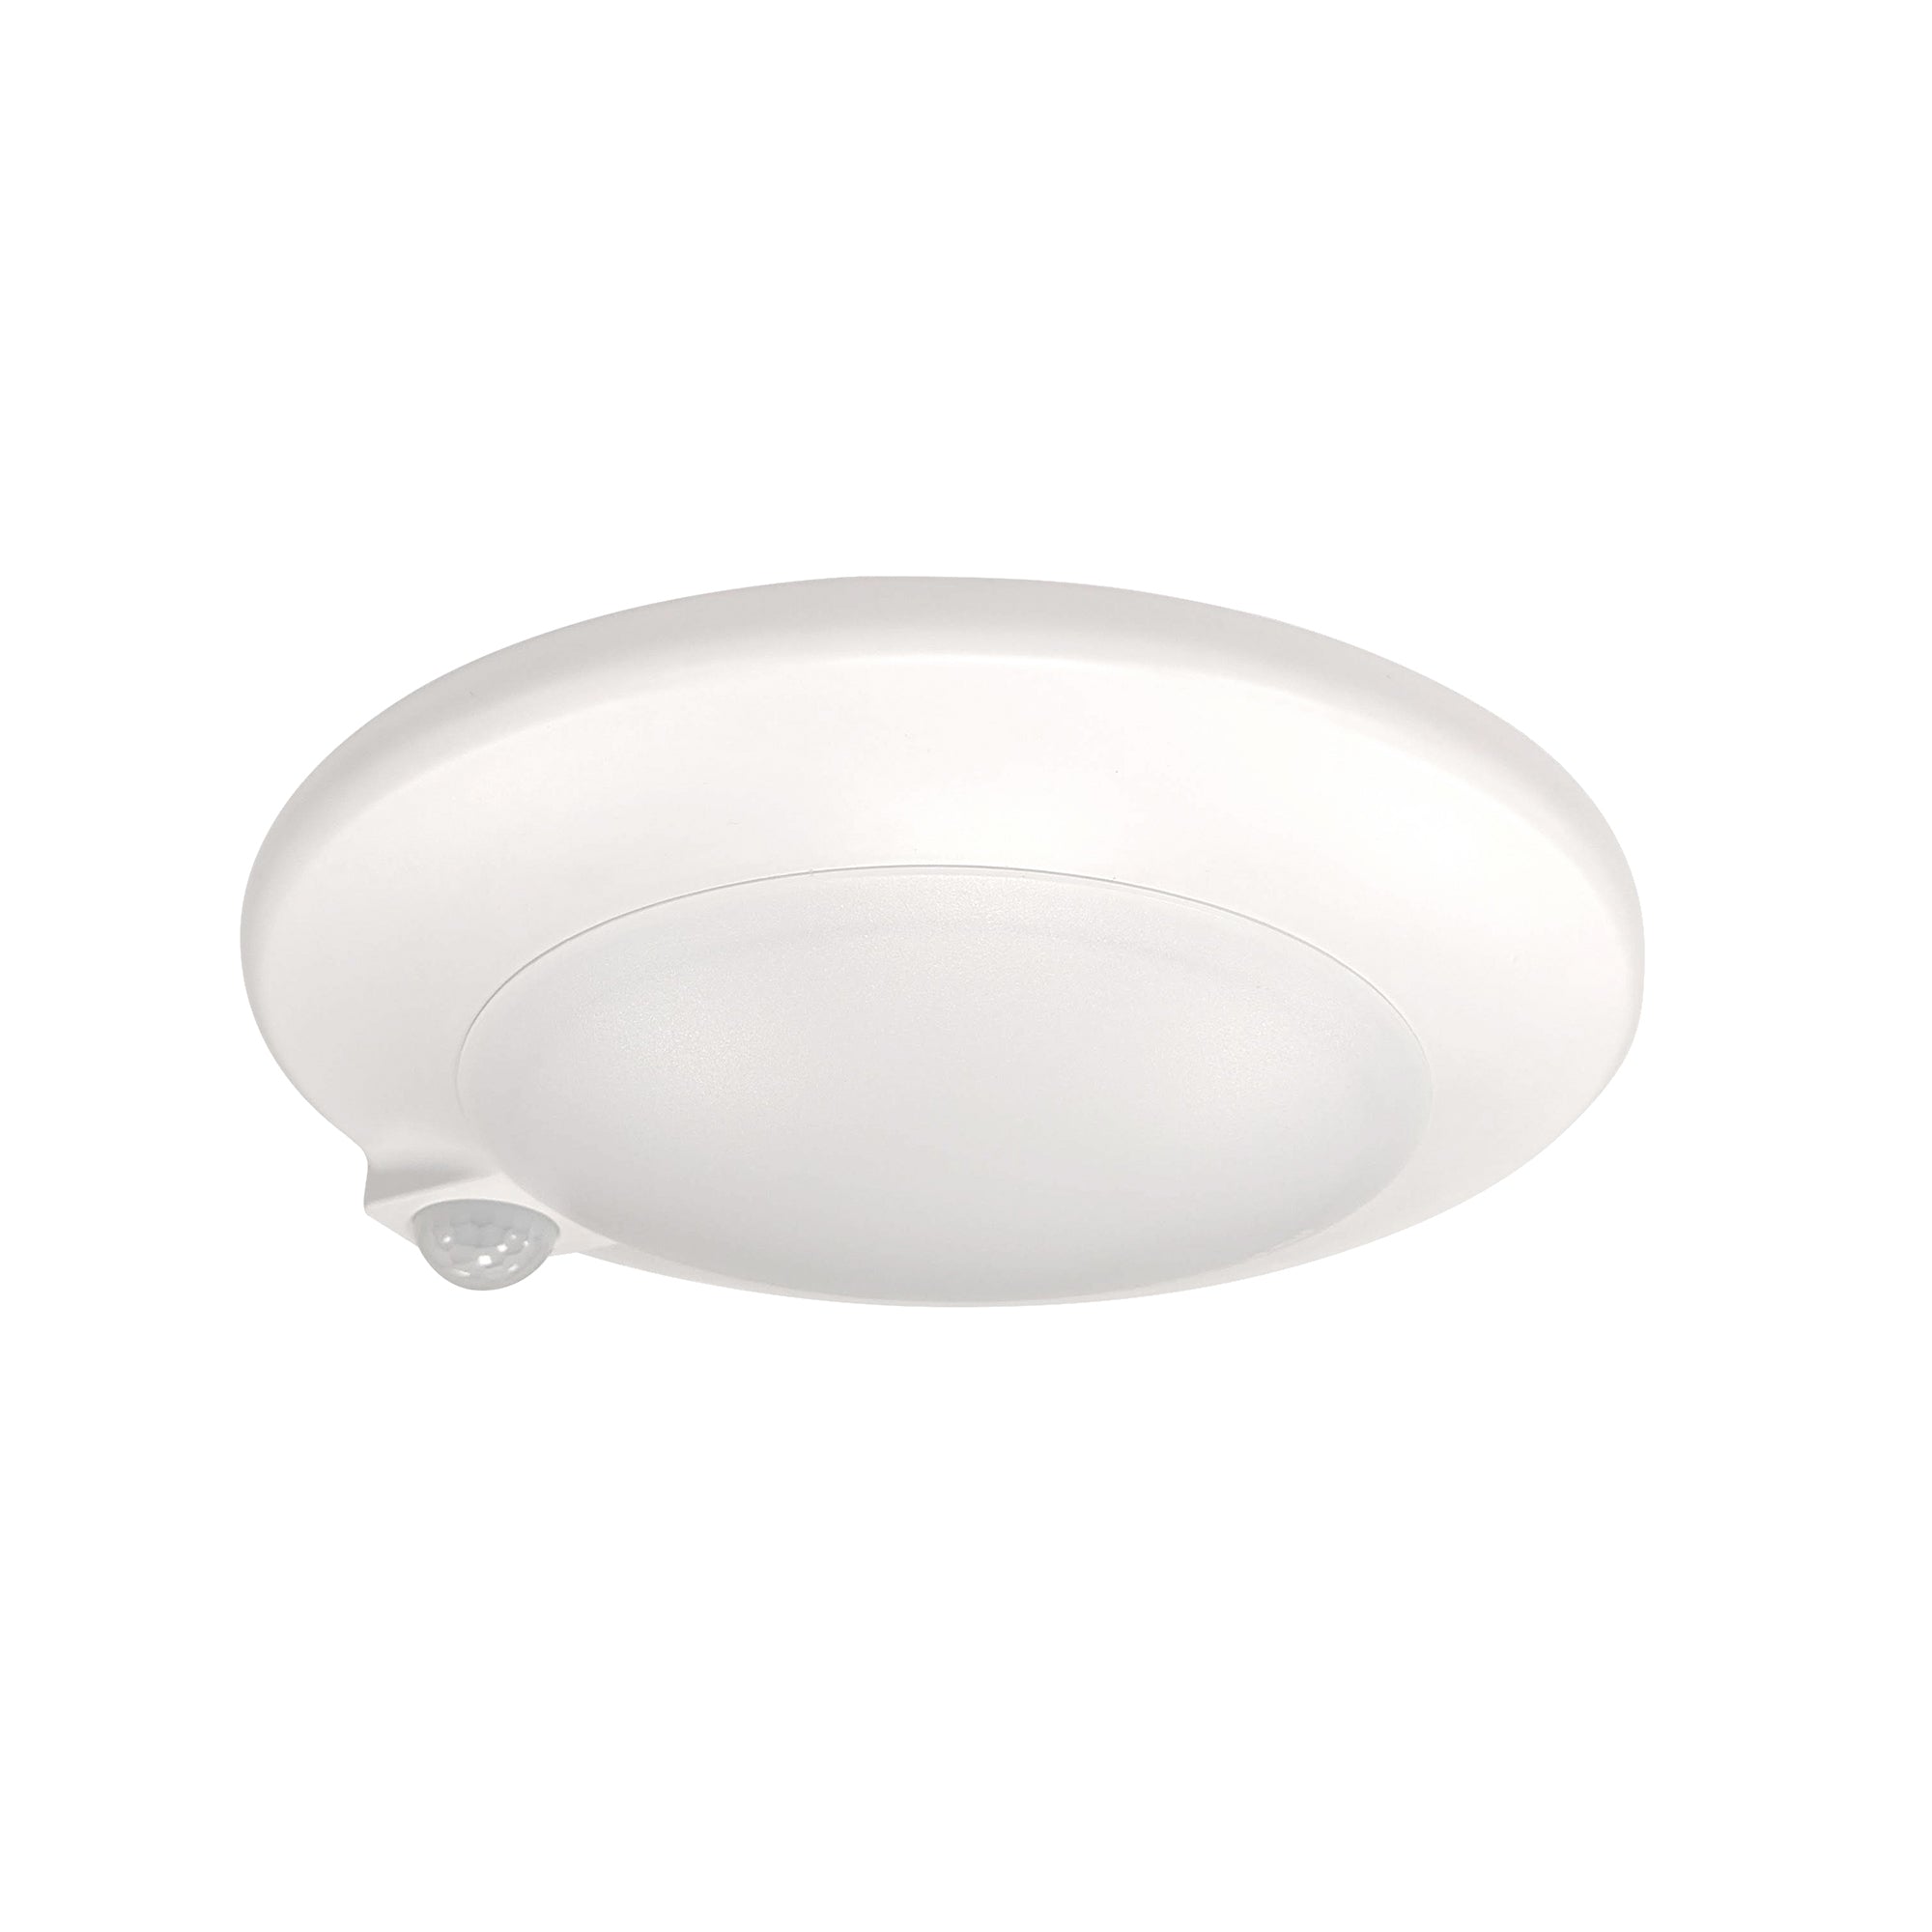 Nora Lighting LE44 - NLOPAC-R7MS30W - Surface - White